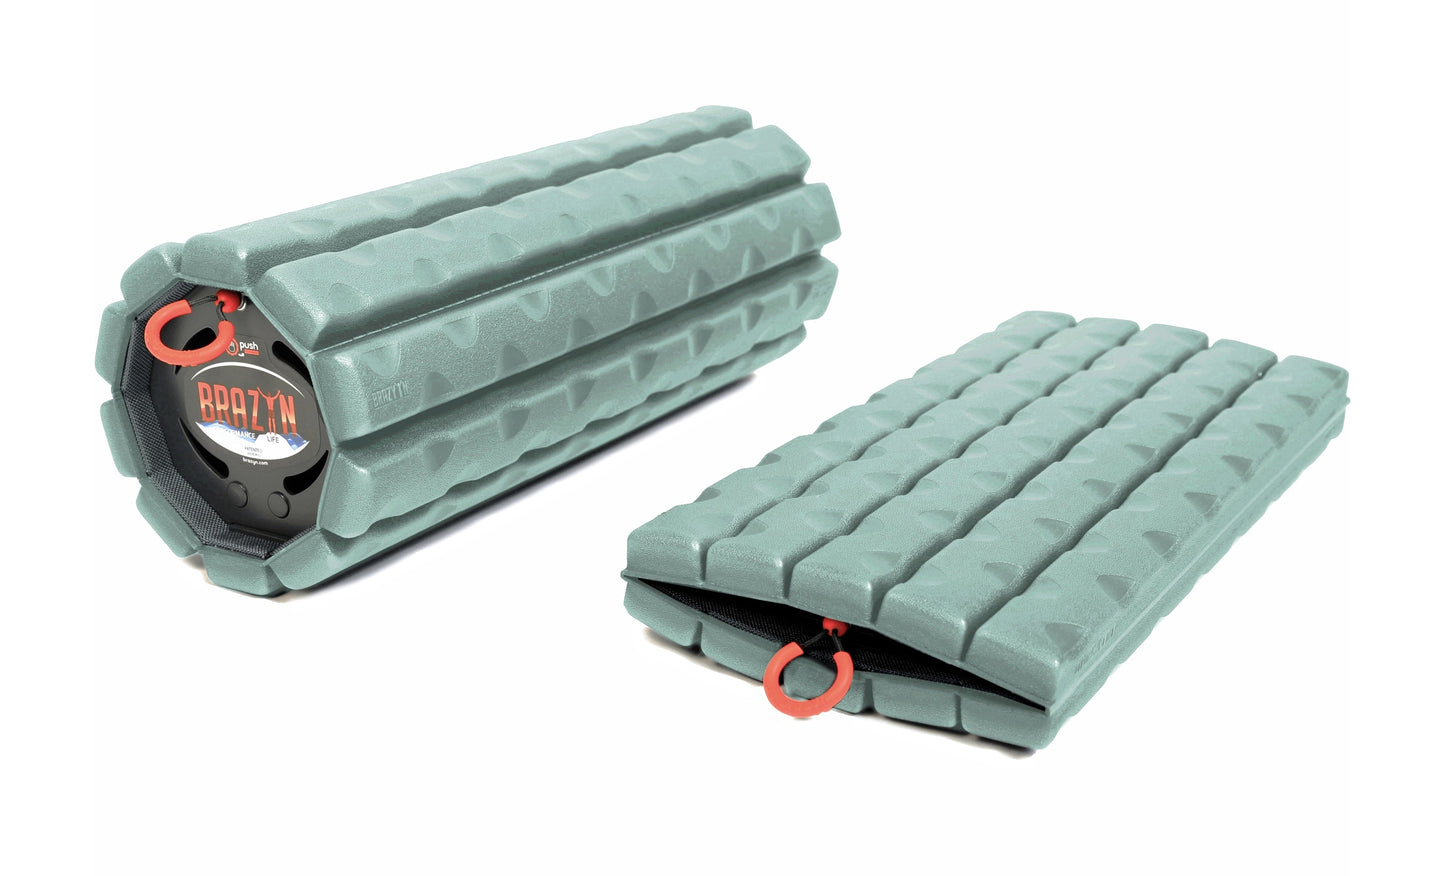 Morph - Collapsible Foam Roller by Brazyn Life